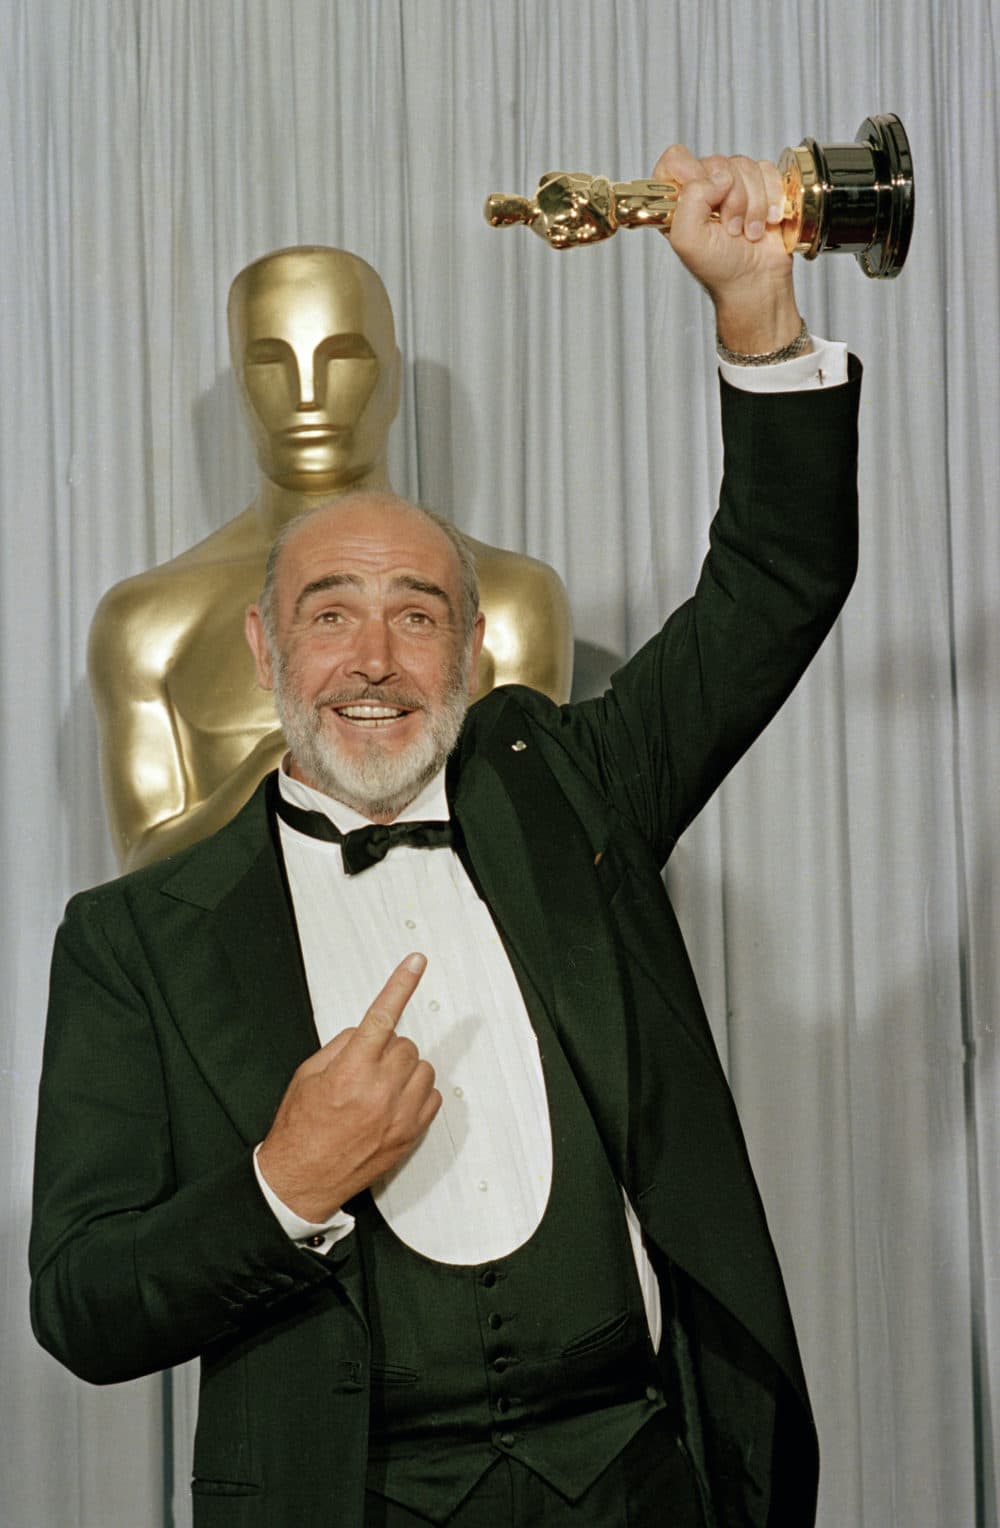 In this file photo dated April 11, 1988, Sean Connery holds up his best supporting actor Oscar for &quot;The Untouchables&quot; at the 60th annual Academy Awards in Los Angeles, Ca., USA. Scottish actor Sean Connery, considered by many to have been the best James Bond, has died aged 90, according to an announcement from his family. (Lennox McLendon/AP)